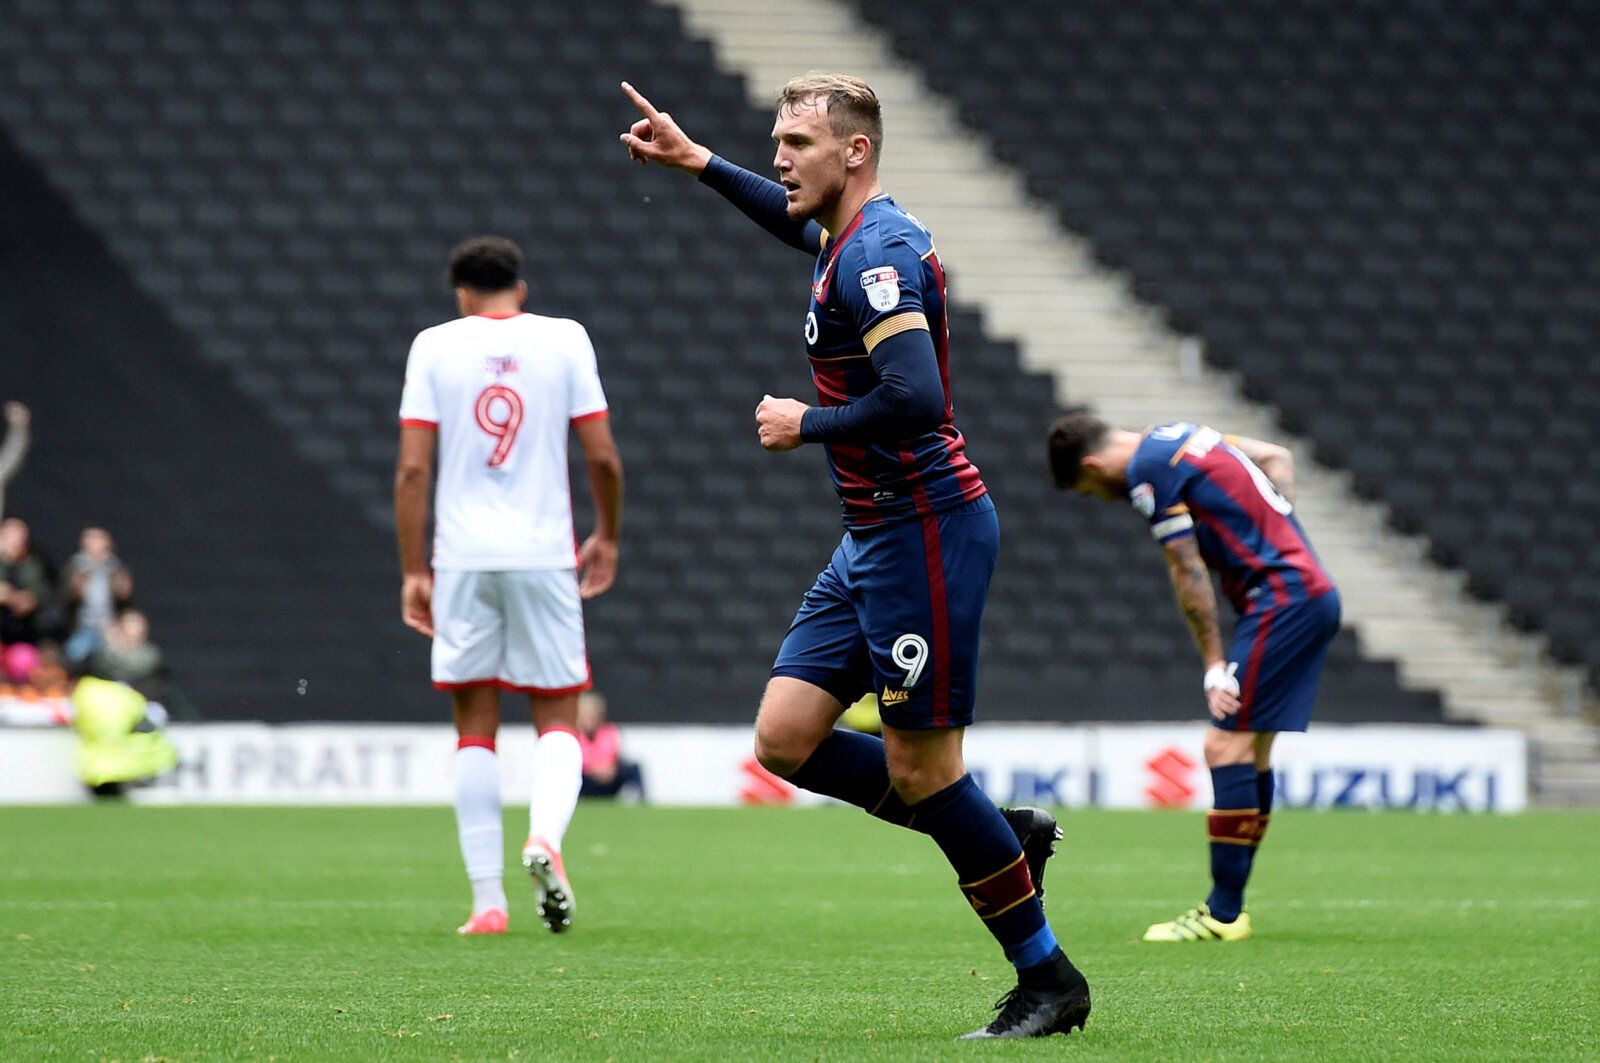 Soccer Football - League One - Milton Keynes Dons vs Bradford City - Stadium MK, Milton Keynes, Britain - October 7, 2017  Bradford's Charlie Wyke celebrates scoring their second goal  Action Images/Alan Walter EDITORIAL USE ONLY. No use with unauthorized audio, video, data, fixture lists, club/league logos or 